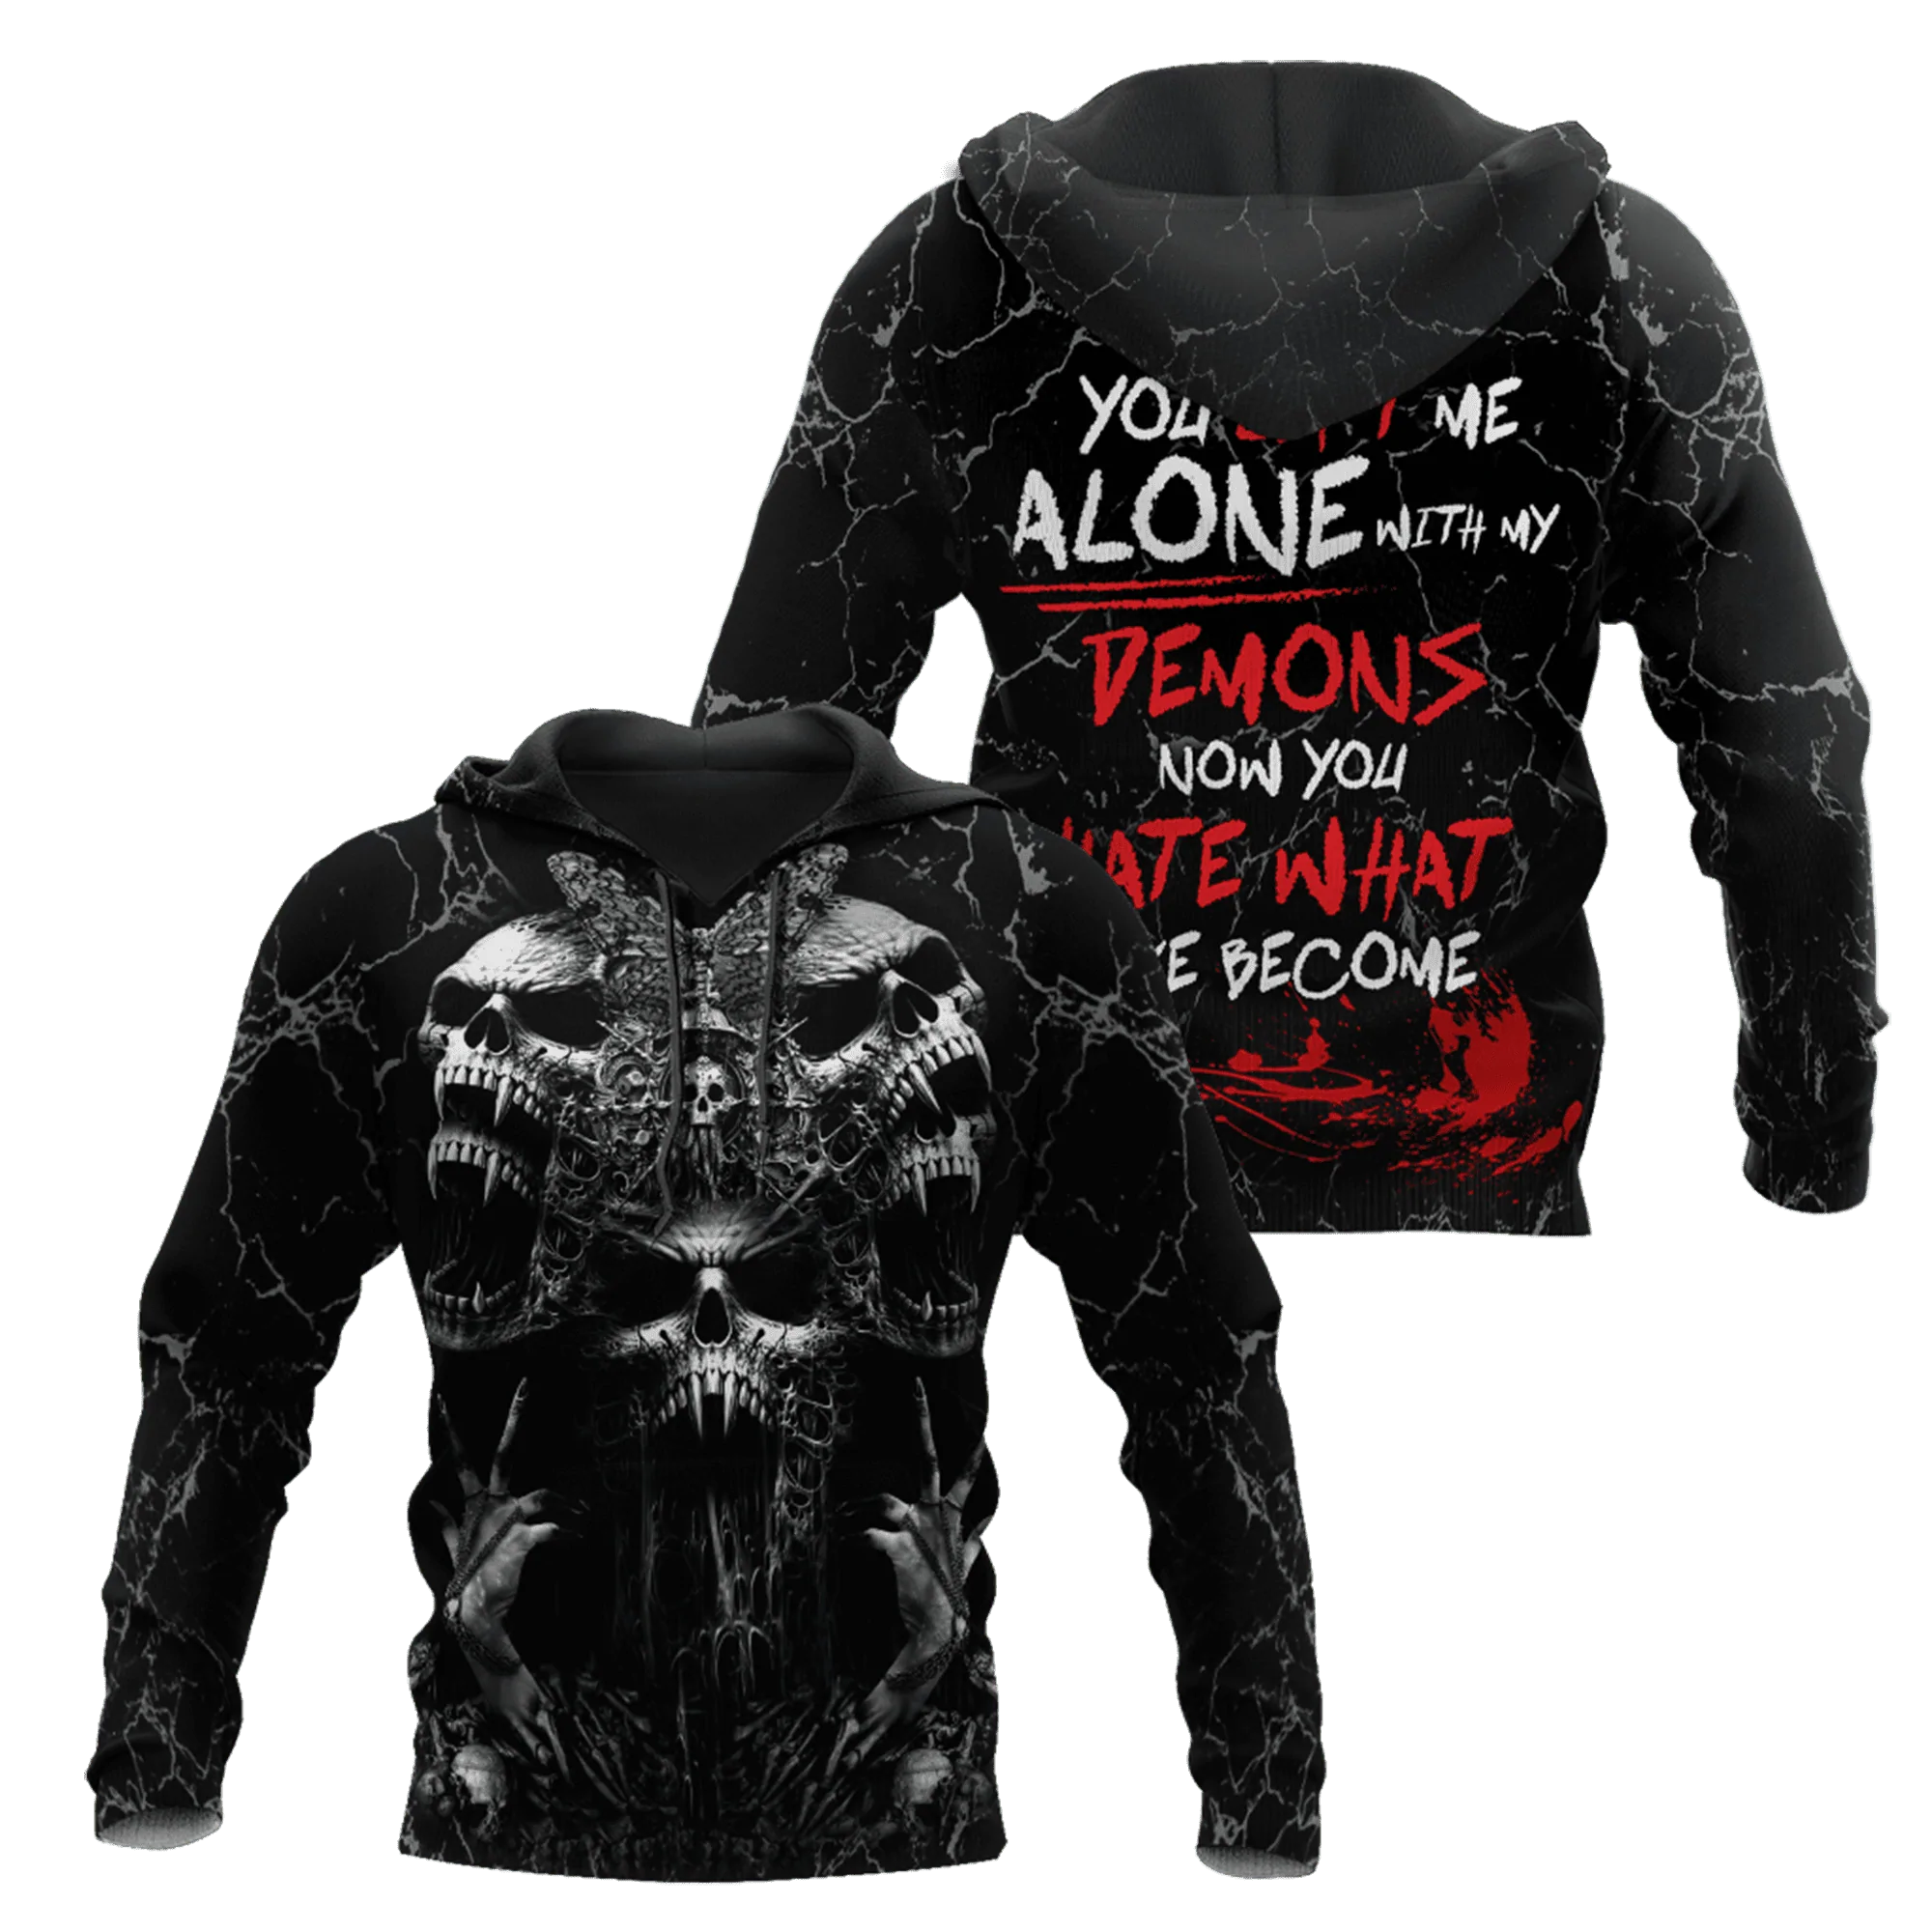 Demon Skull Unisex Hoodie For Boy Girl You Left Me Alone With My Demons Hoodie